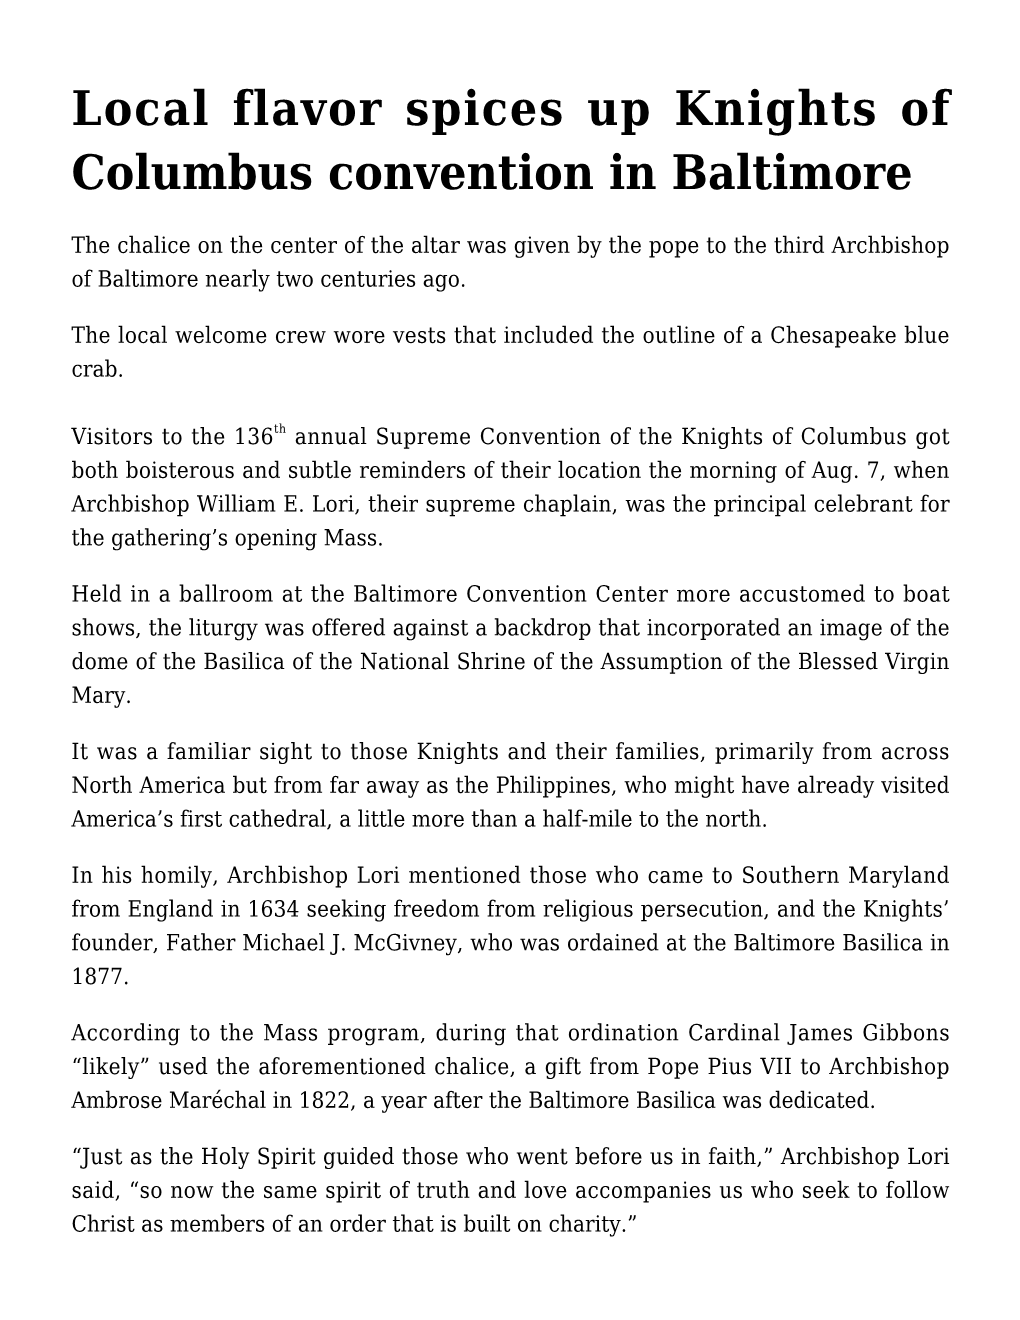 Local Flavor Spices up Knights of Columbus Convention in Baltimore